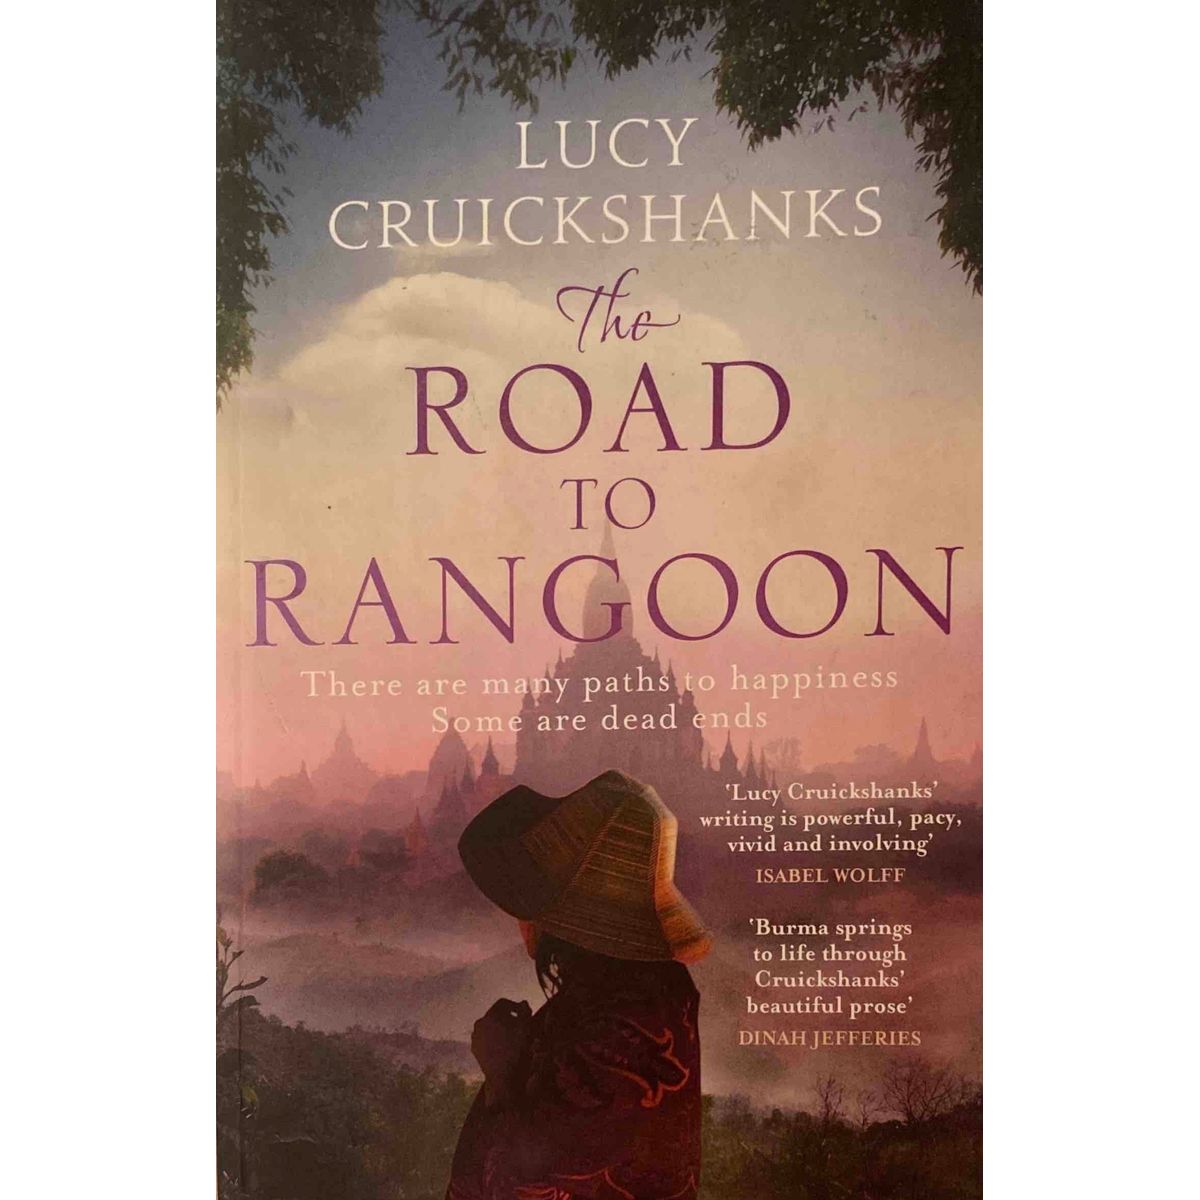 ISBN: 9781782063476 / 1782063471 - The Road to Rangoon by Lucy Cruickshanks [2016]